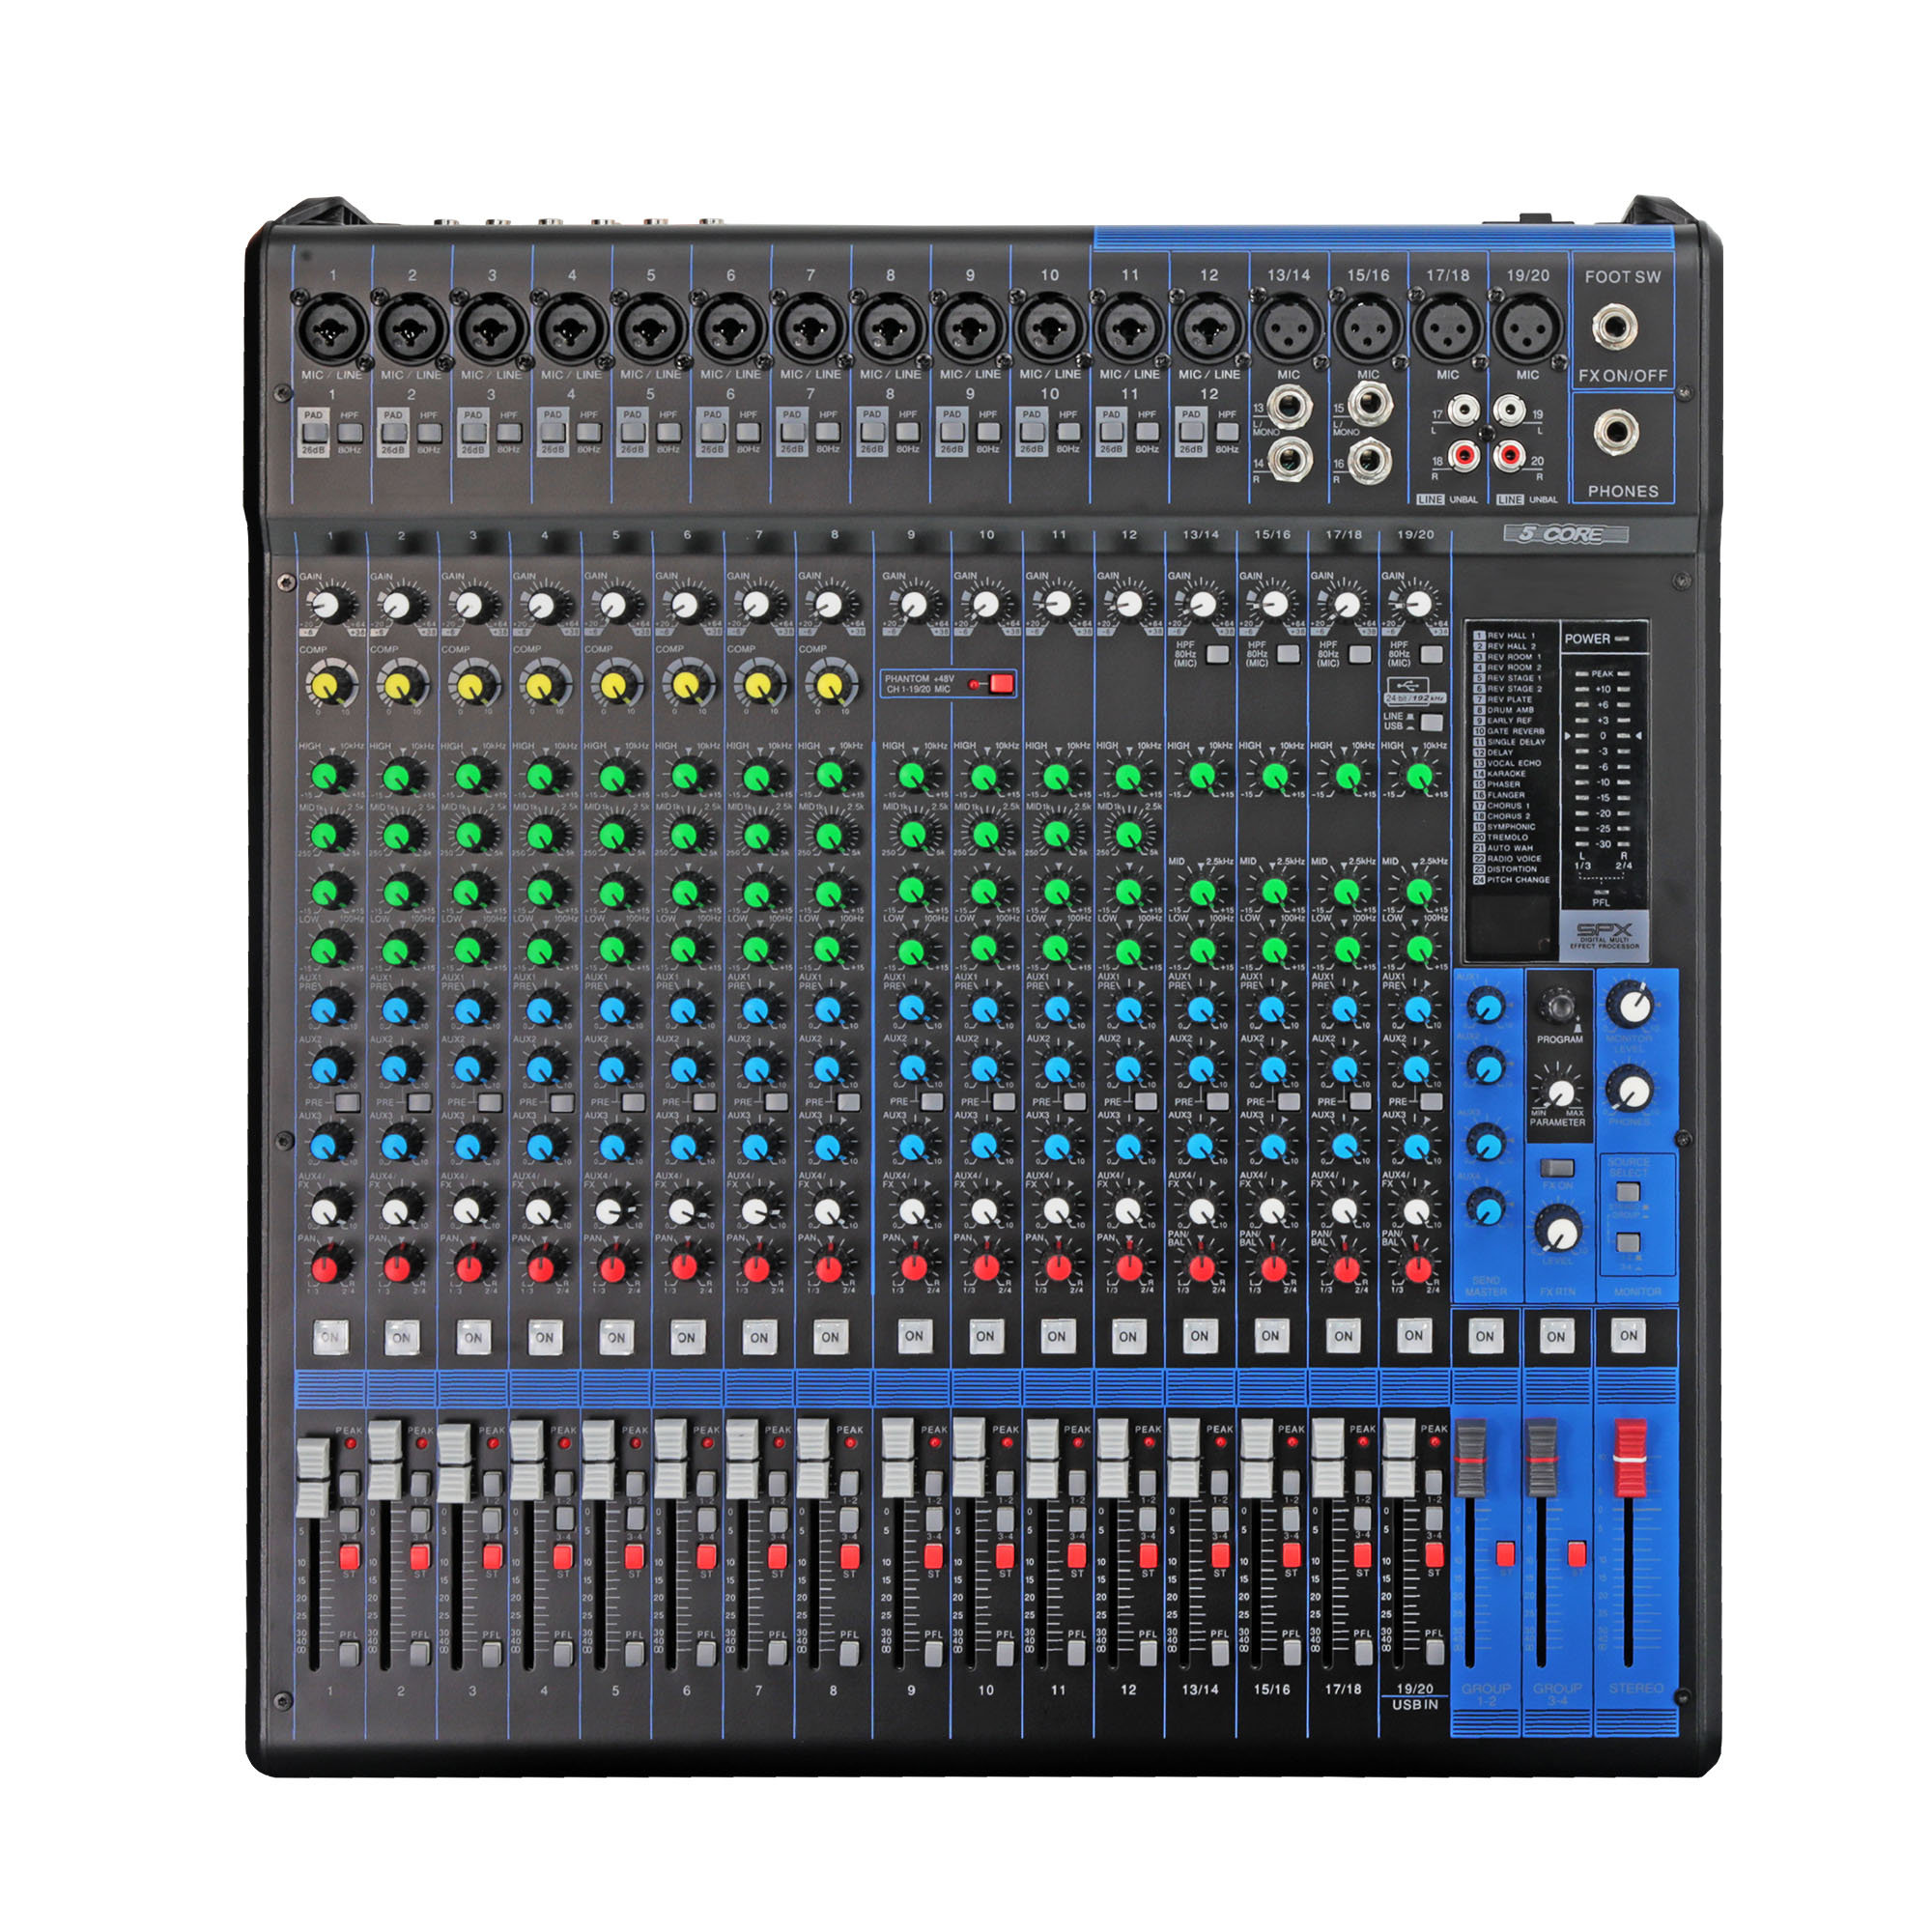 YYBUSHER Professional 12 Channels Sound Board Mixer & Reviews